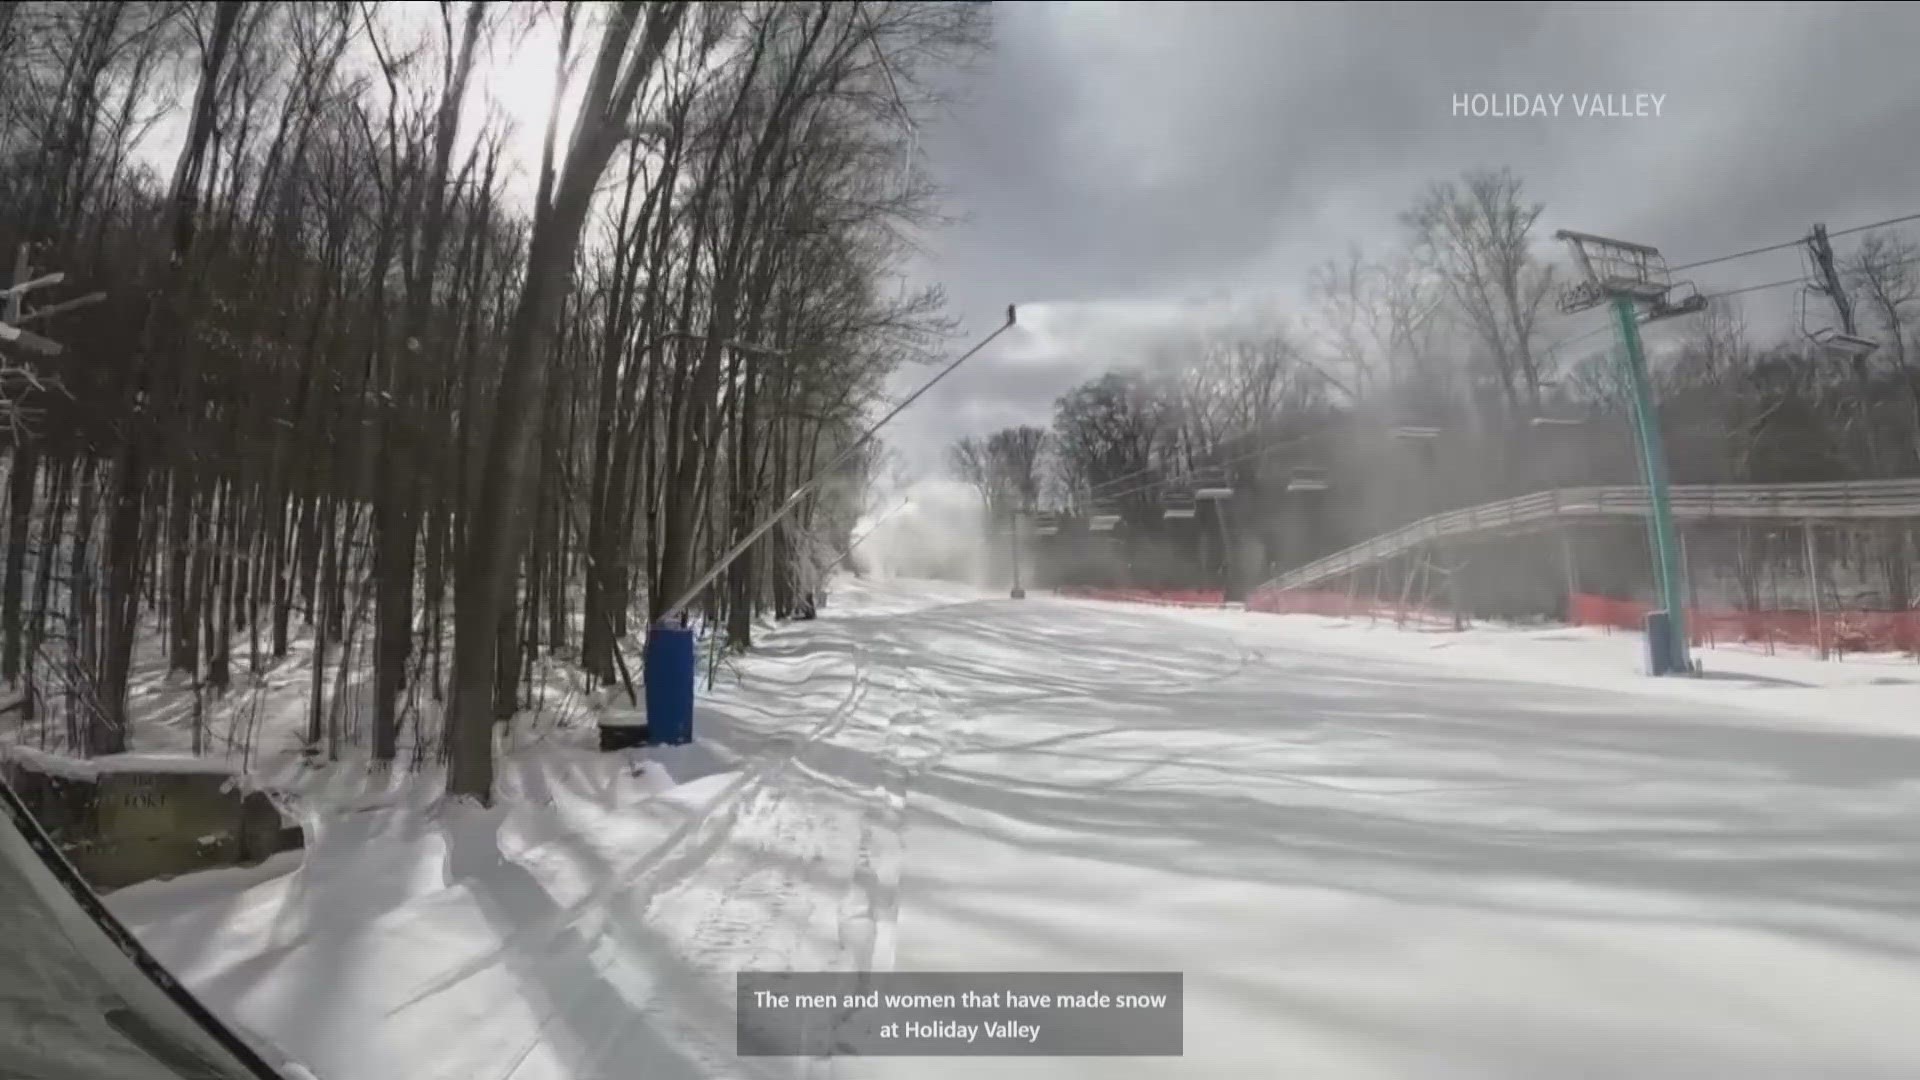 The ski resort shared a video on Facebook, saying it has been able to take advantage of the cold weather and fire up more than 100 snow-making guns.